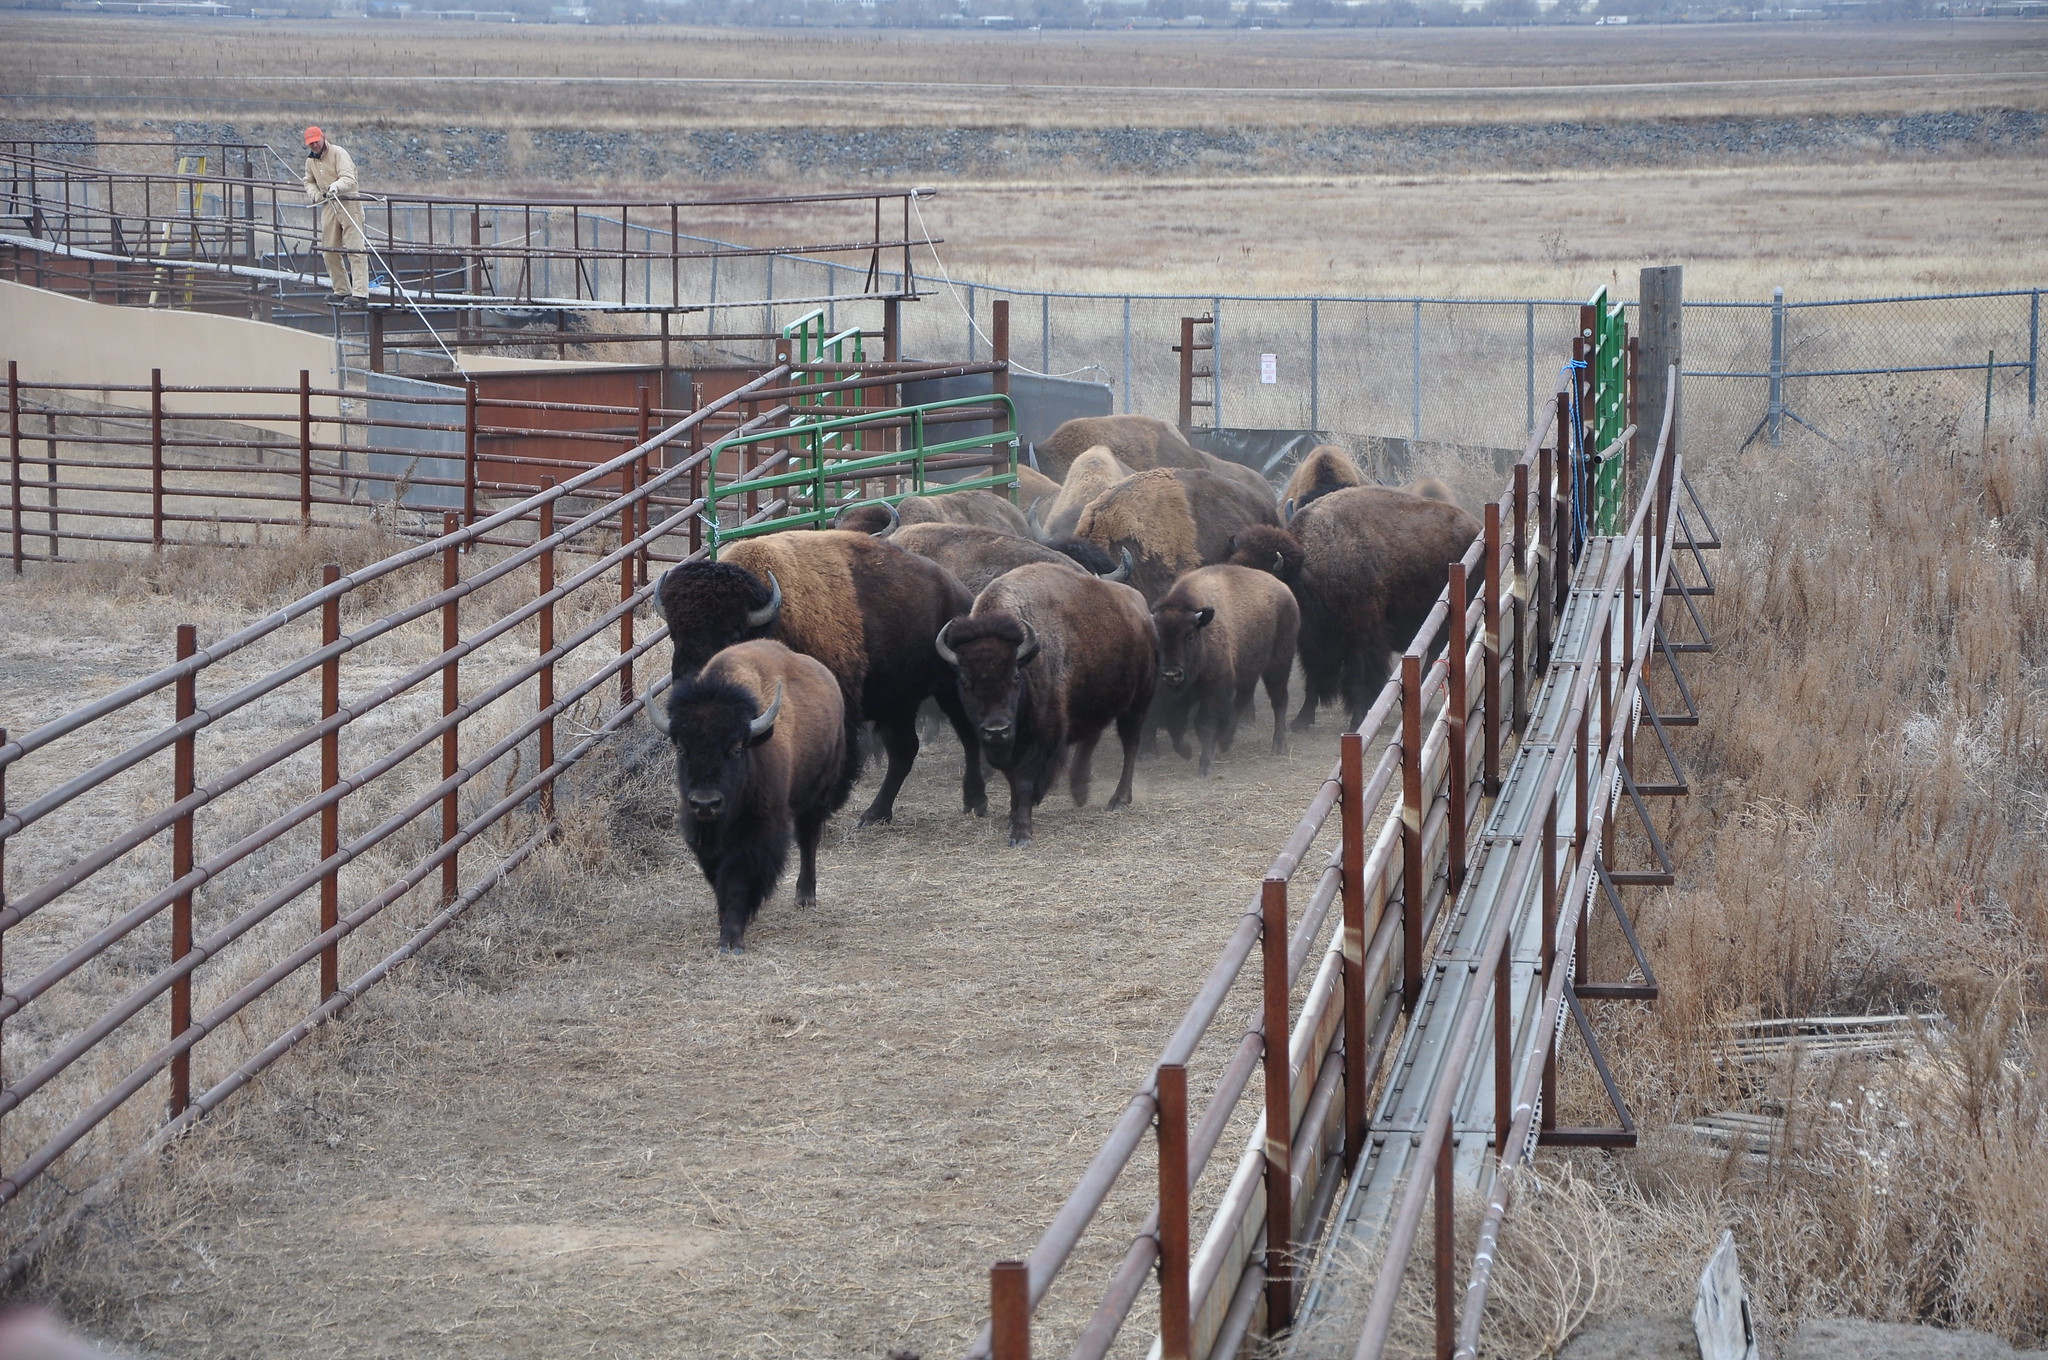 Bison in a cattle chute.